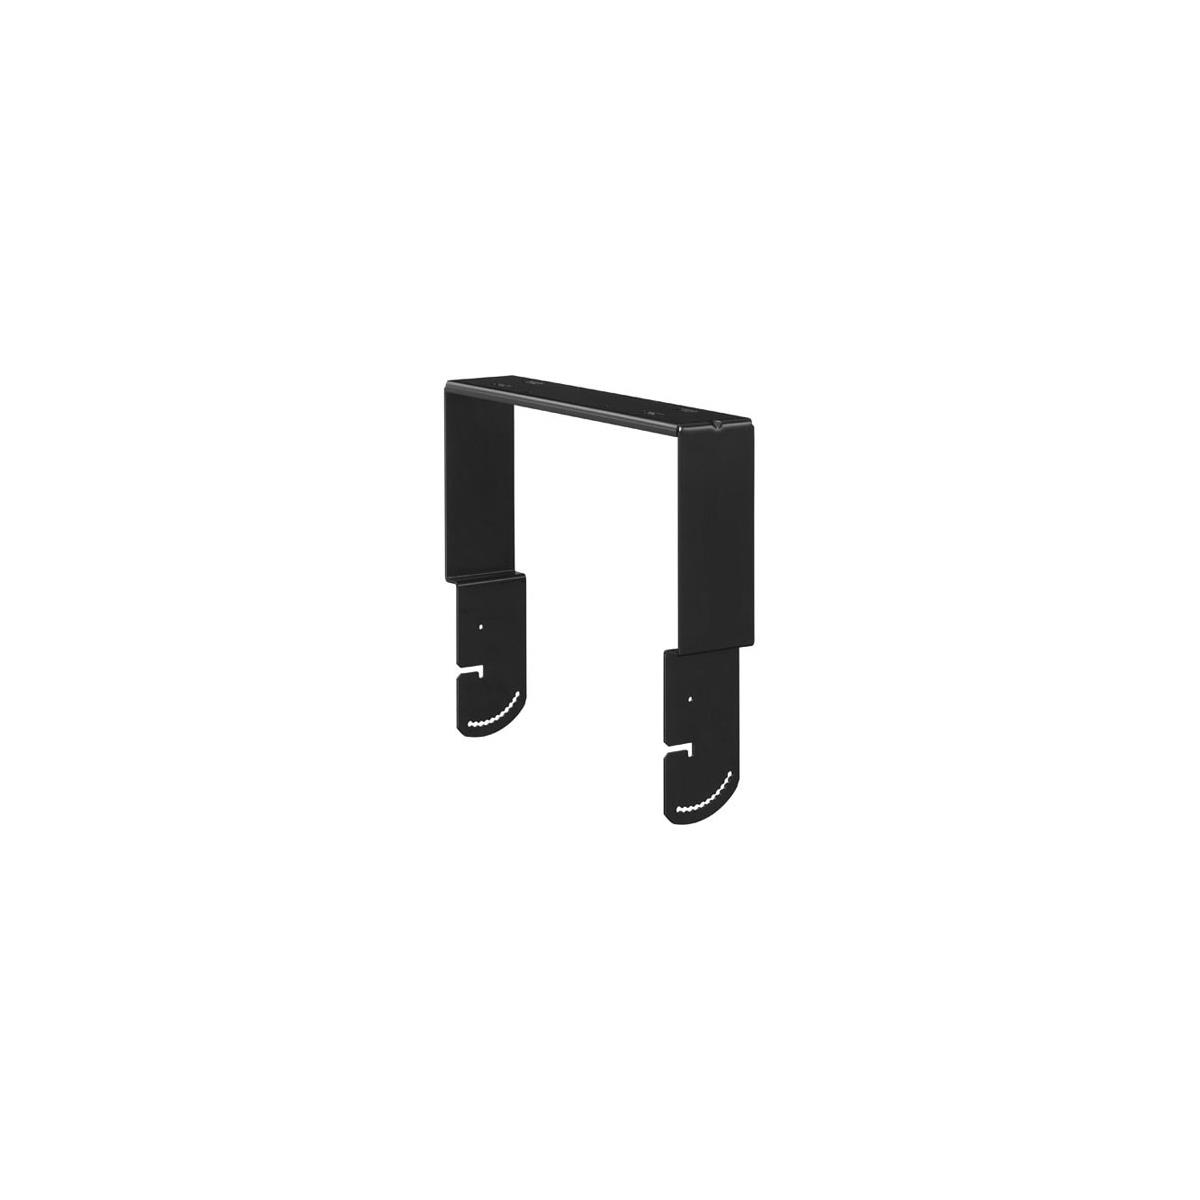 Image of TOA Electronics HY-1500 Vertical Ceiling Mount for HS-1500 Speakers